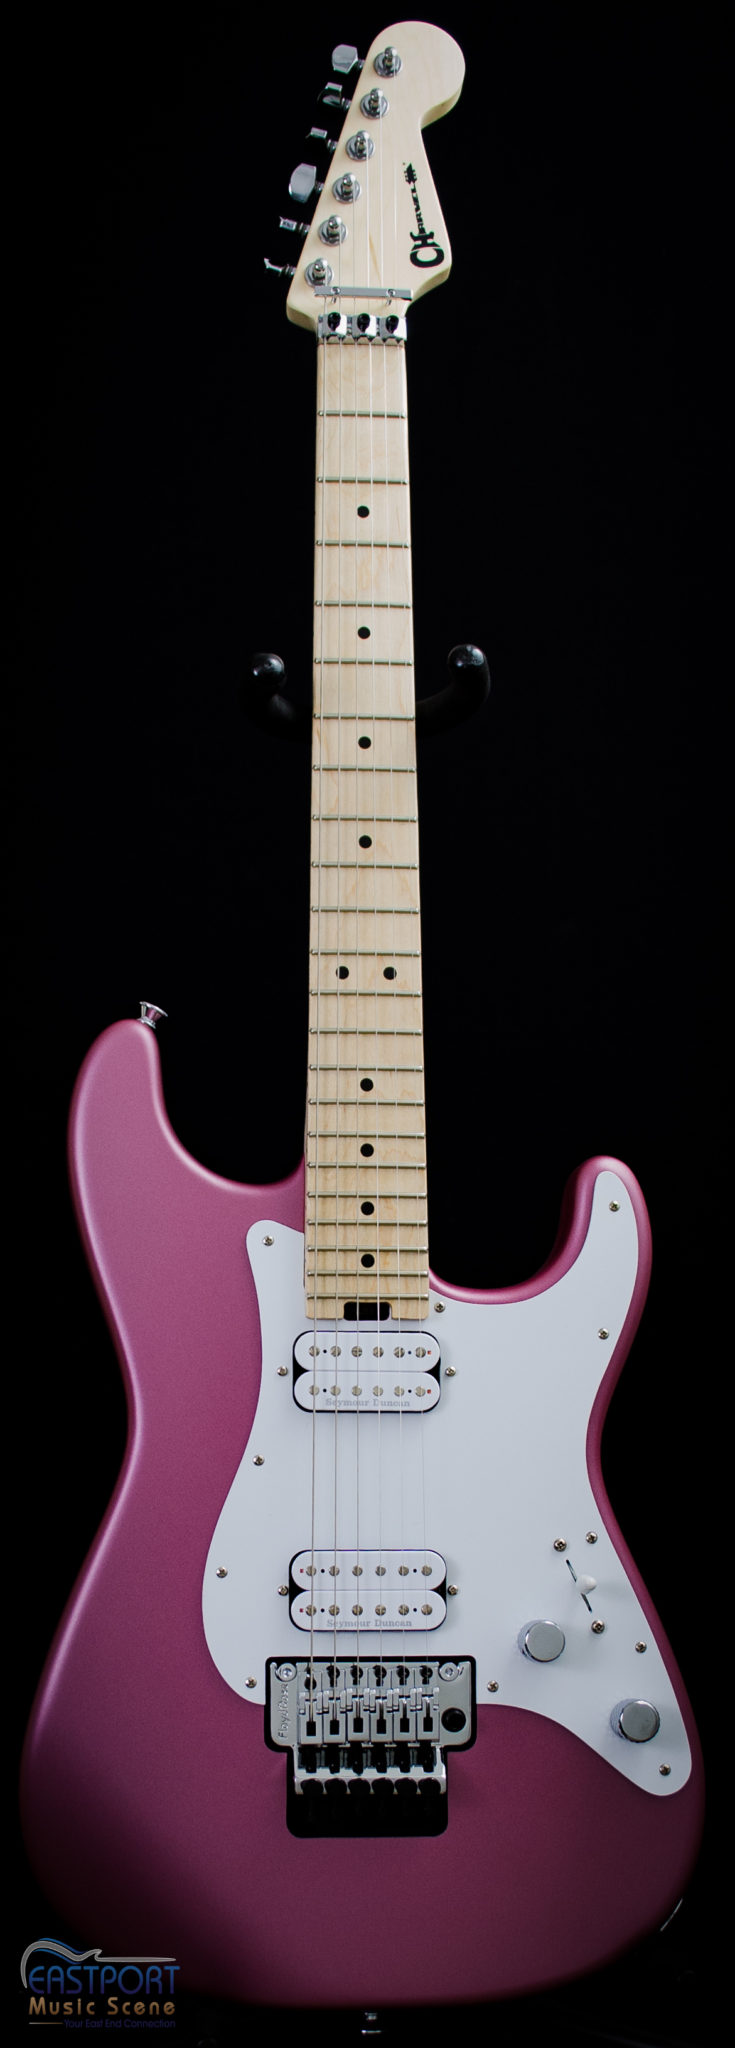 A pink electric guitar with white neck and body.